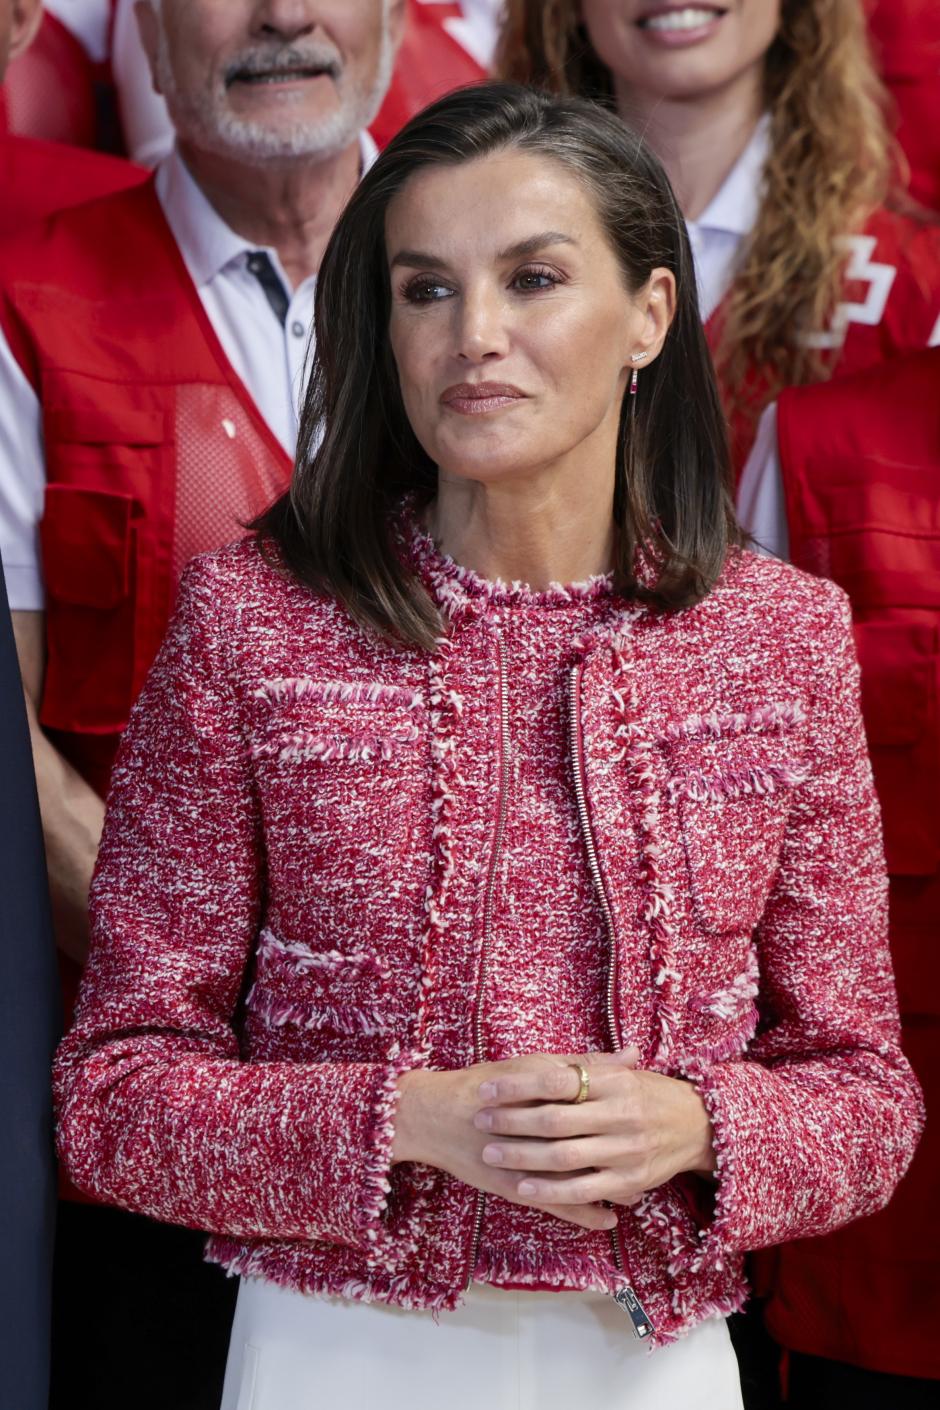 Spanish Queen Letizia Ortiz during a Commemorative event for the World Day of the Red Cross and Red Crescent Societies in Asturias on Tuesday, 14 May 2024